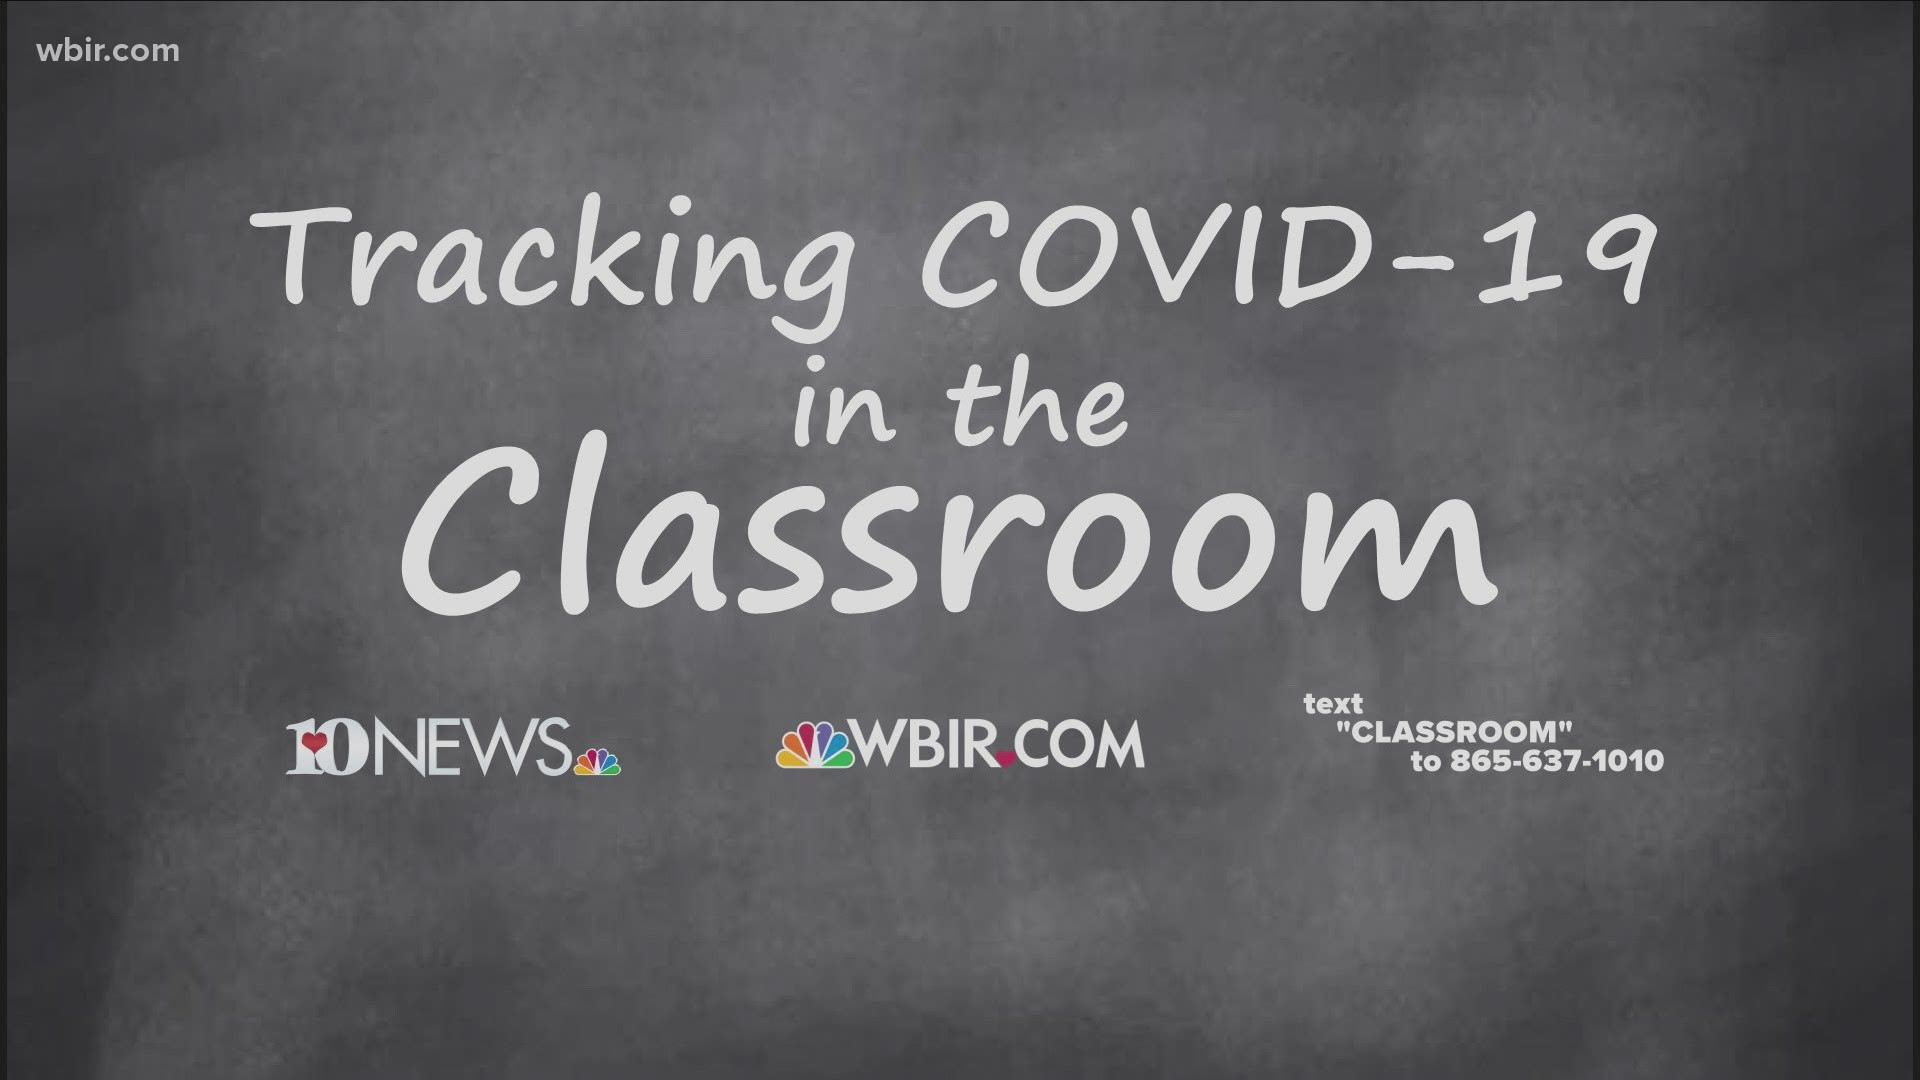 WBIR's data team now confirms more than 575 cases of the virus in East Tennessee school districts.